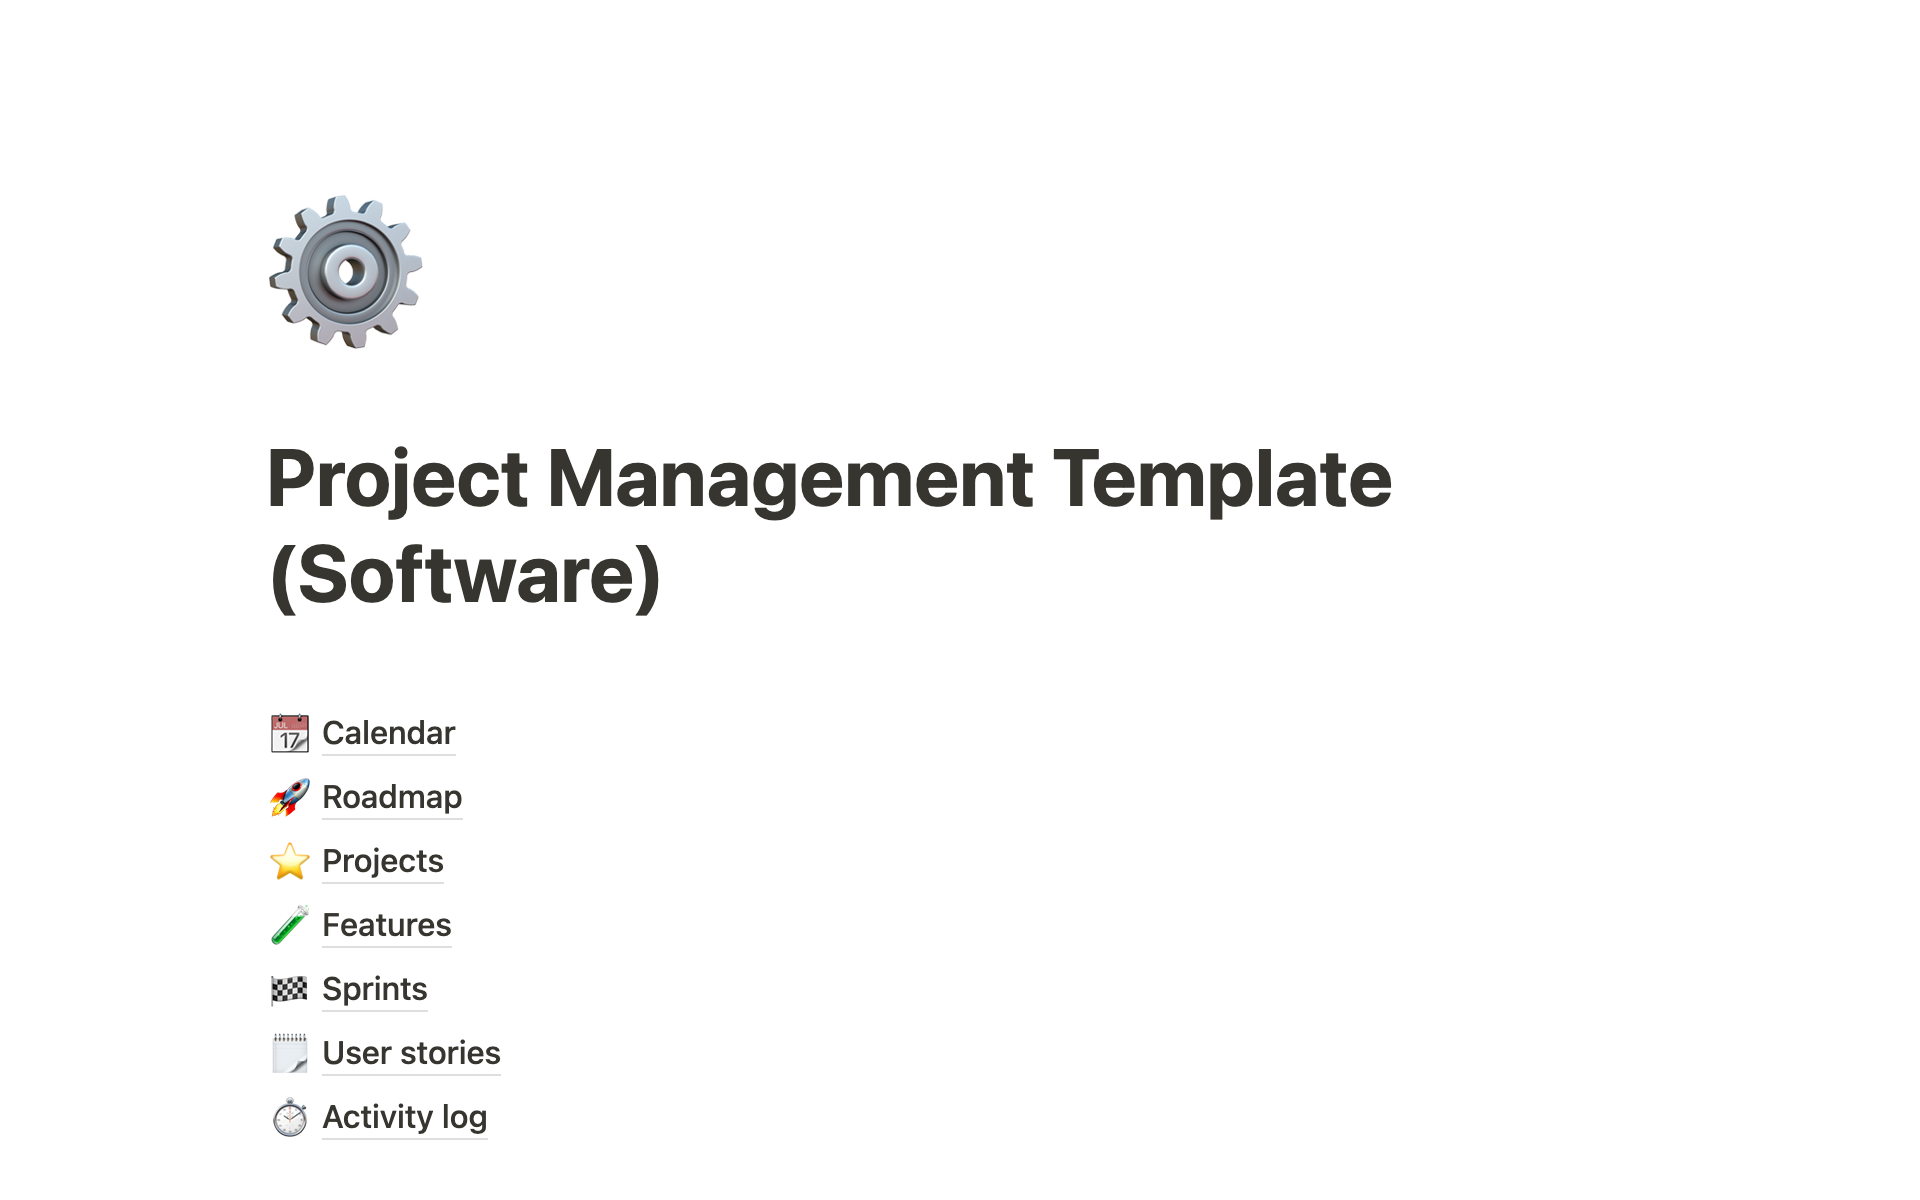 Project management template (Software)のテンプレートのプレビュー